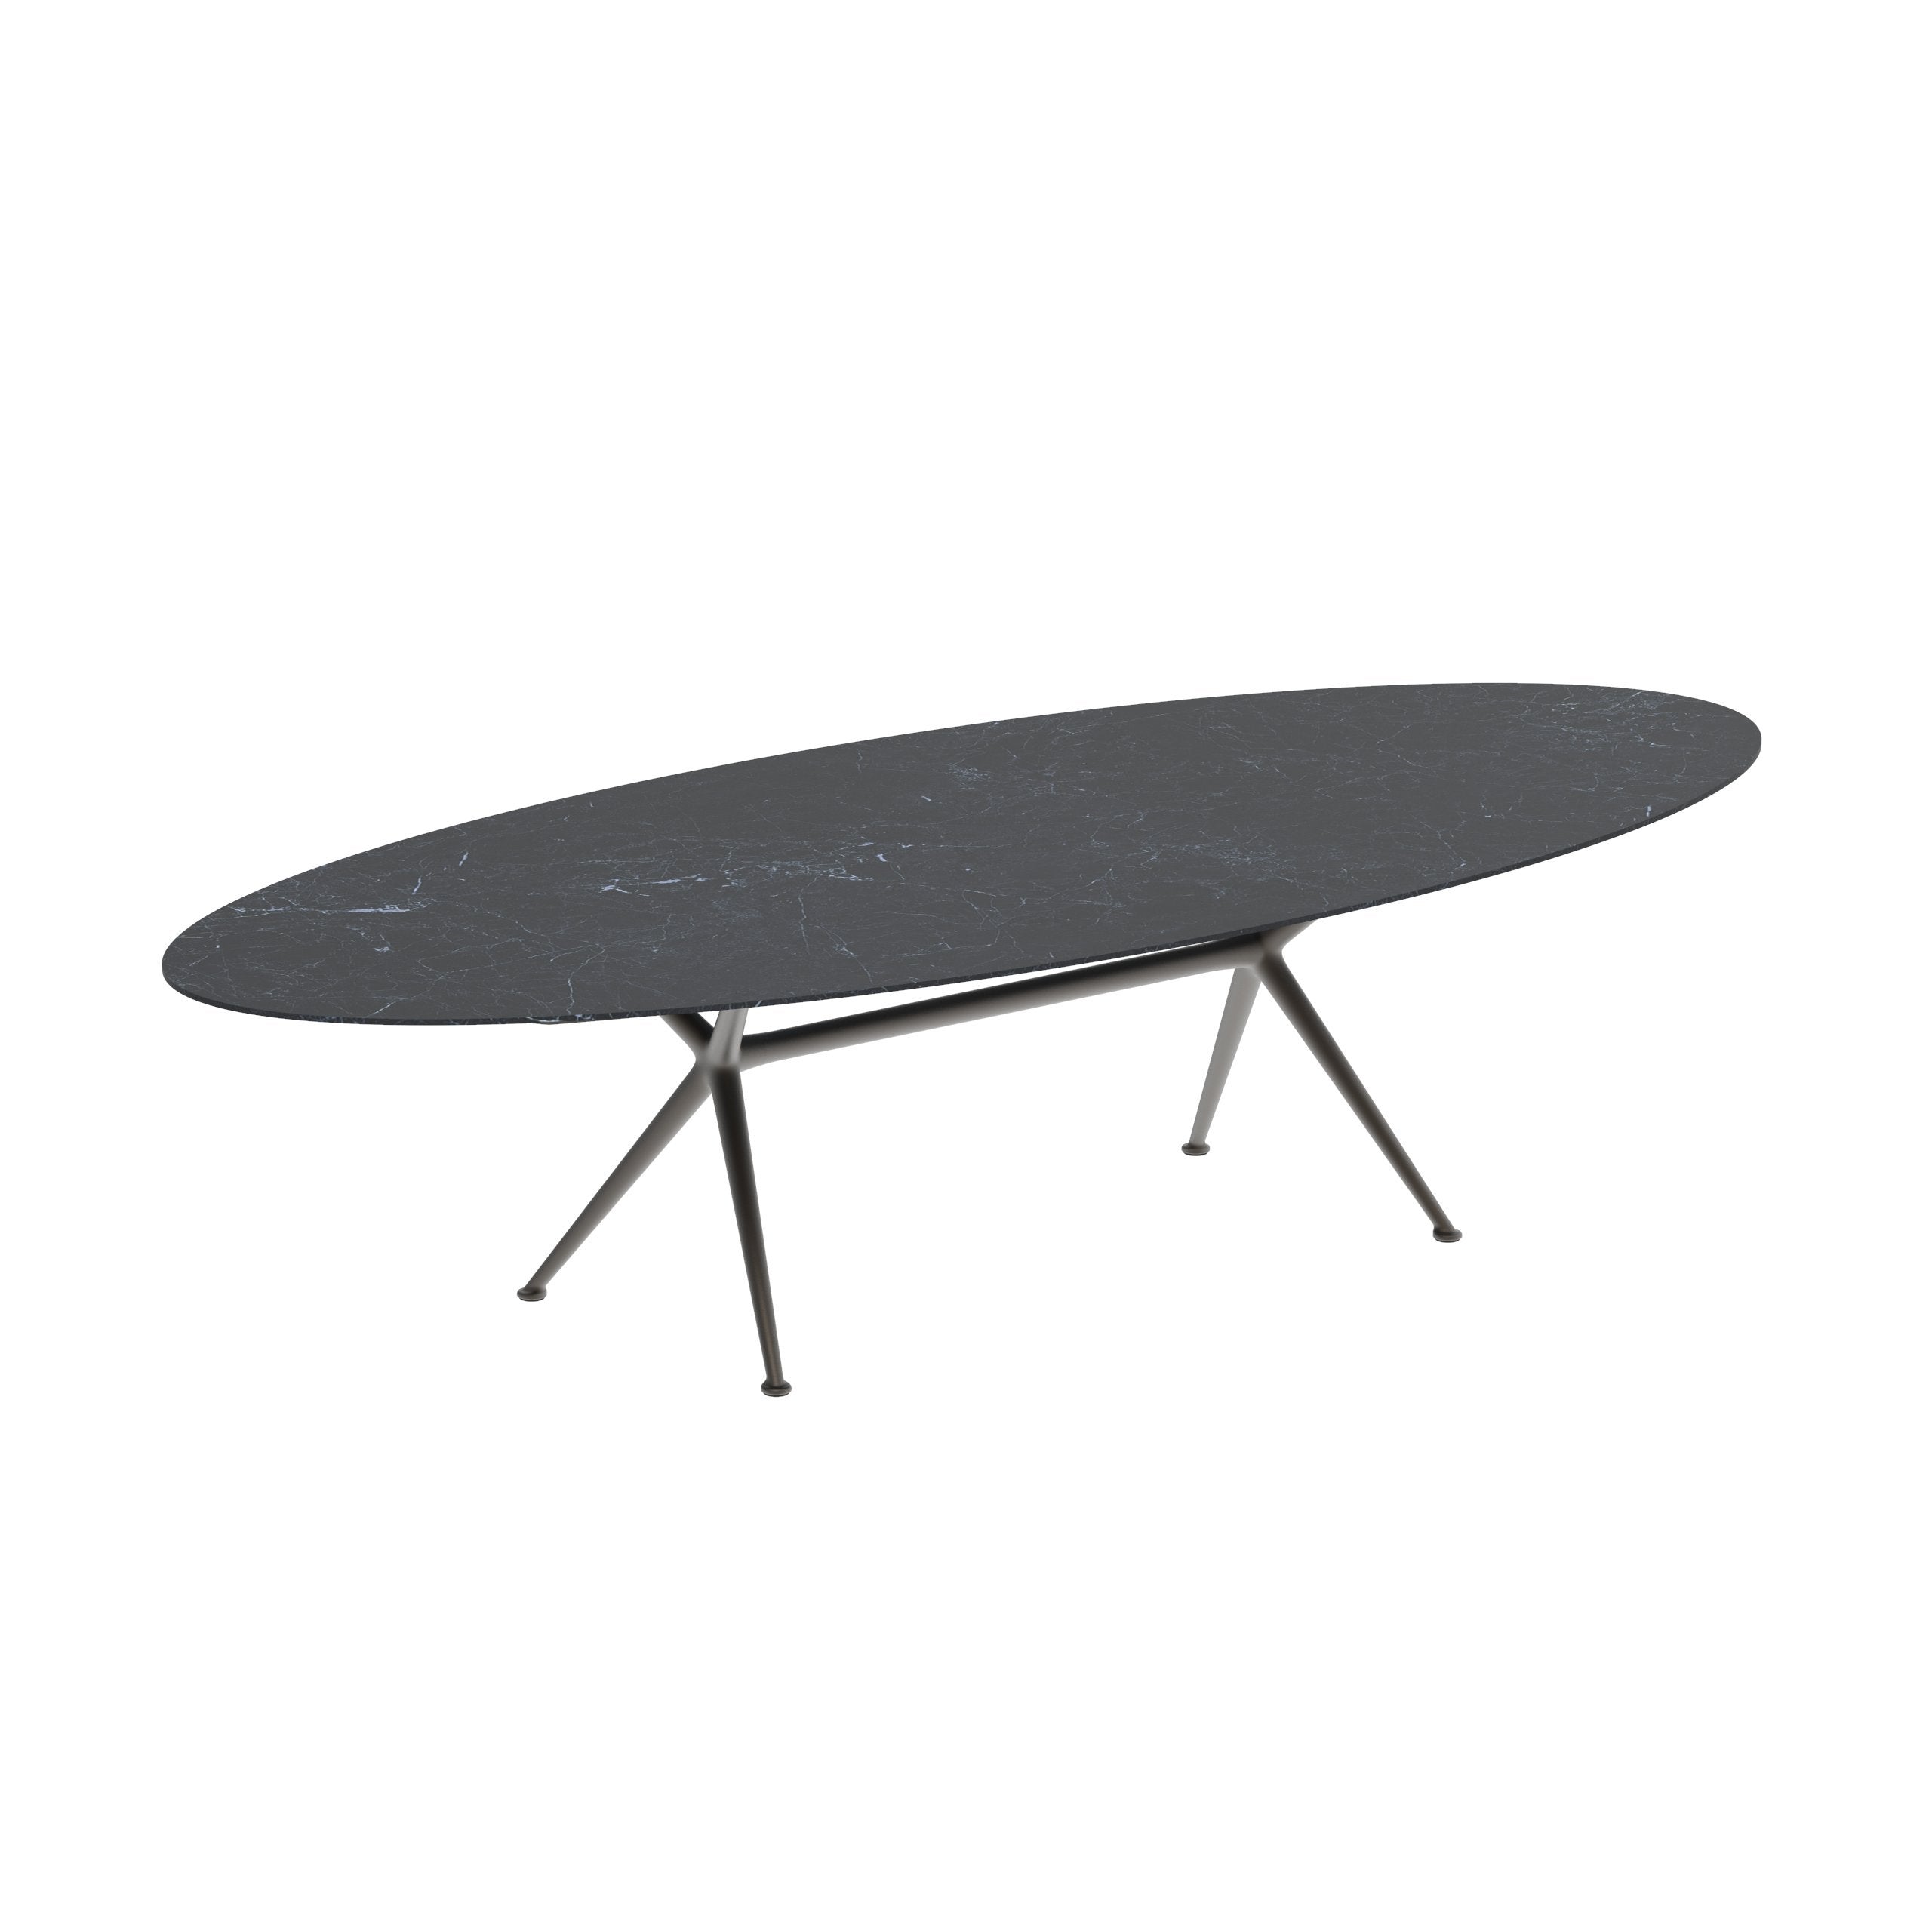 EXES Oval Table